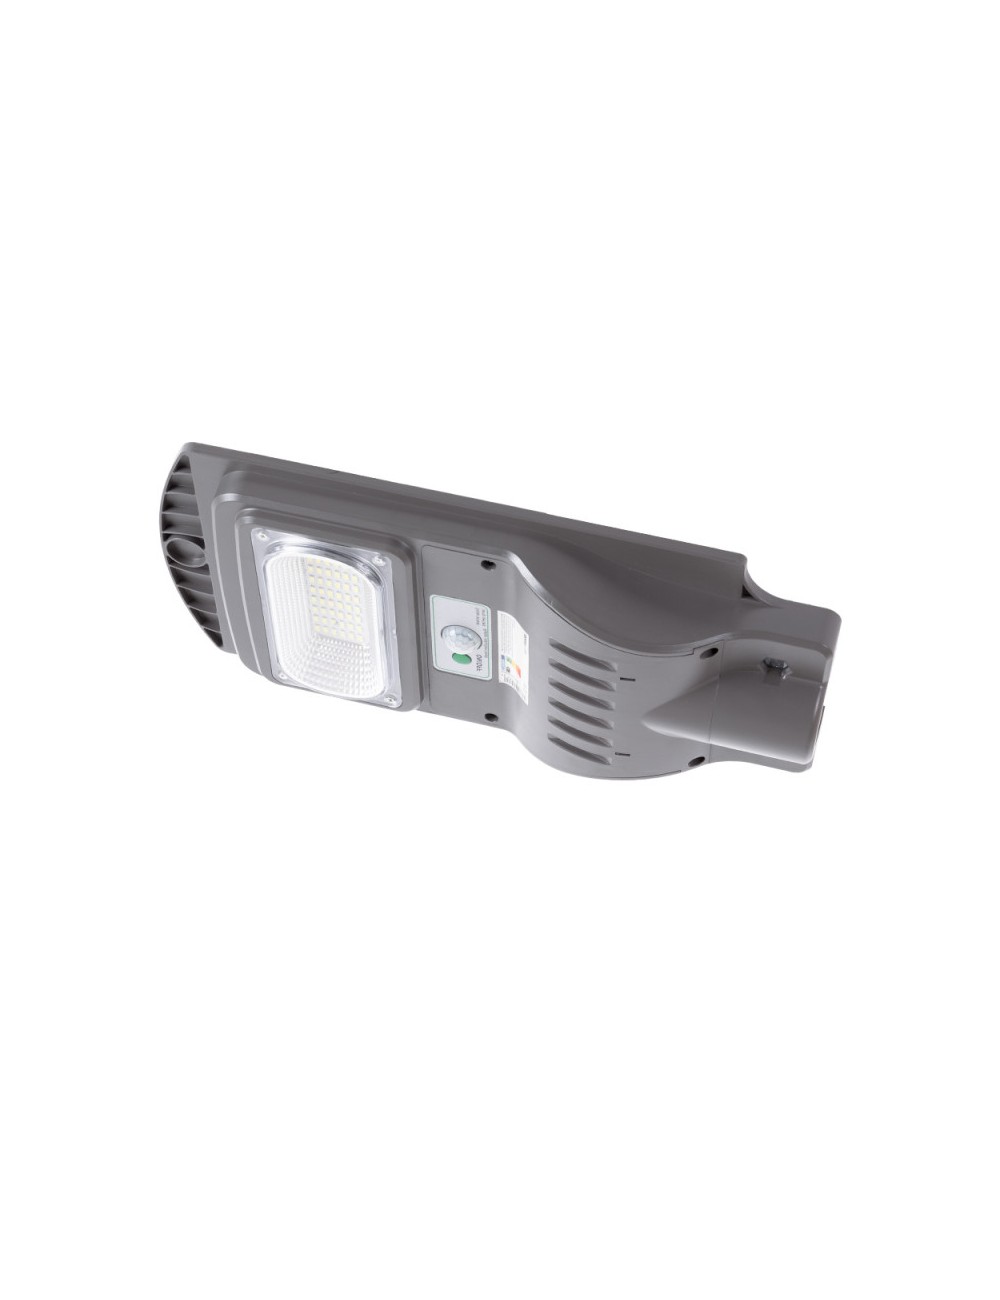 lampadaire LED 20W 6000ºK IP65 Solaire Sensor 50.000H [RS-SLABS20W-CW]